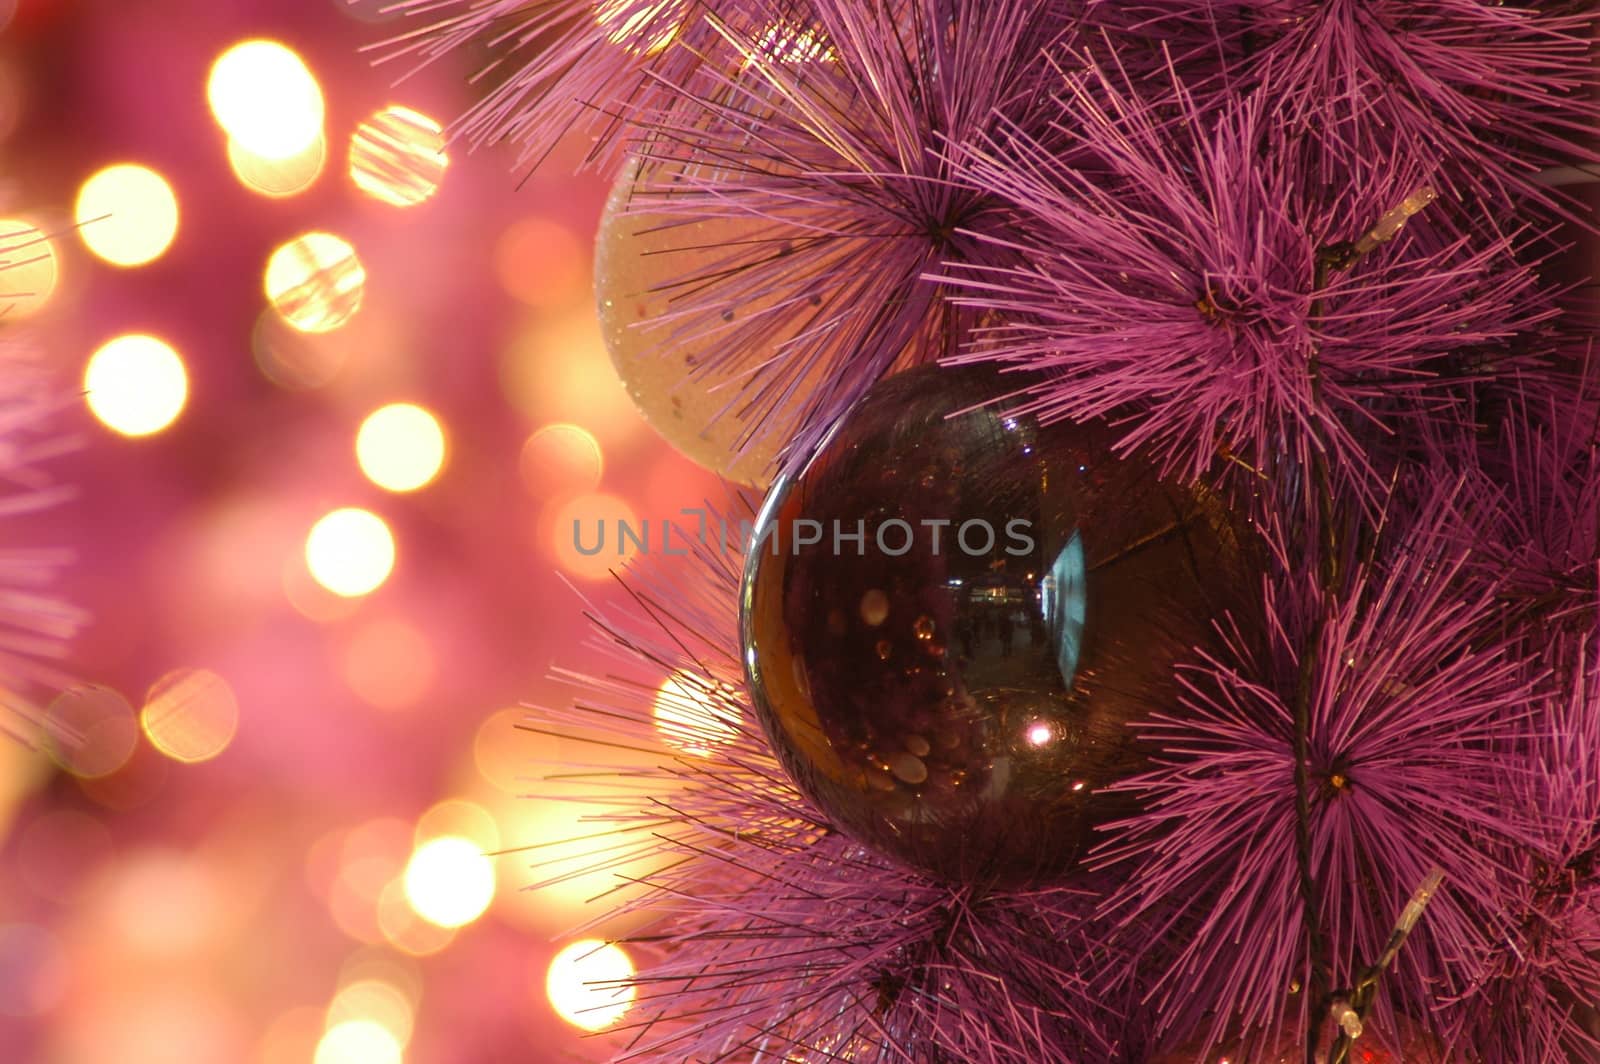 Shiny Christmas red ball hanging on pine branches with festive background by Roman1030